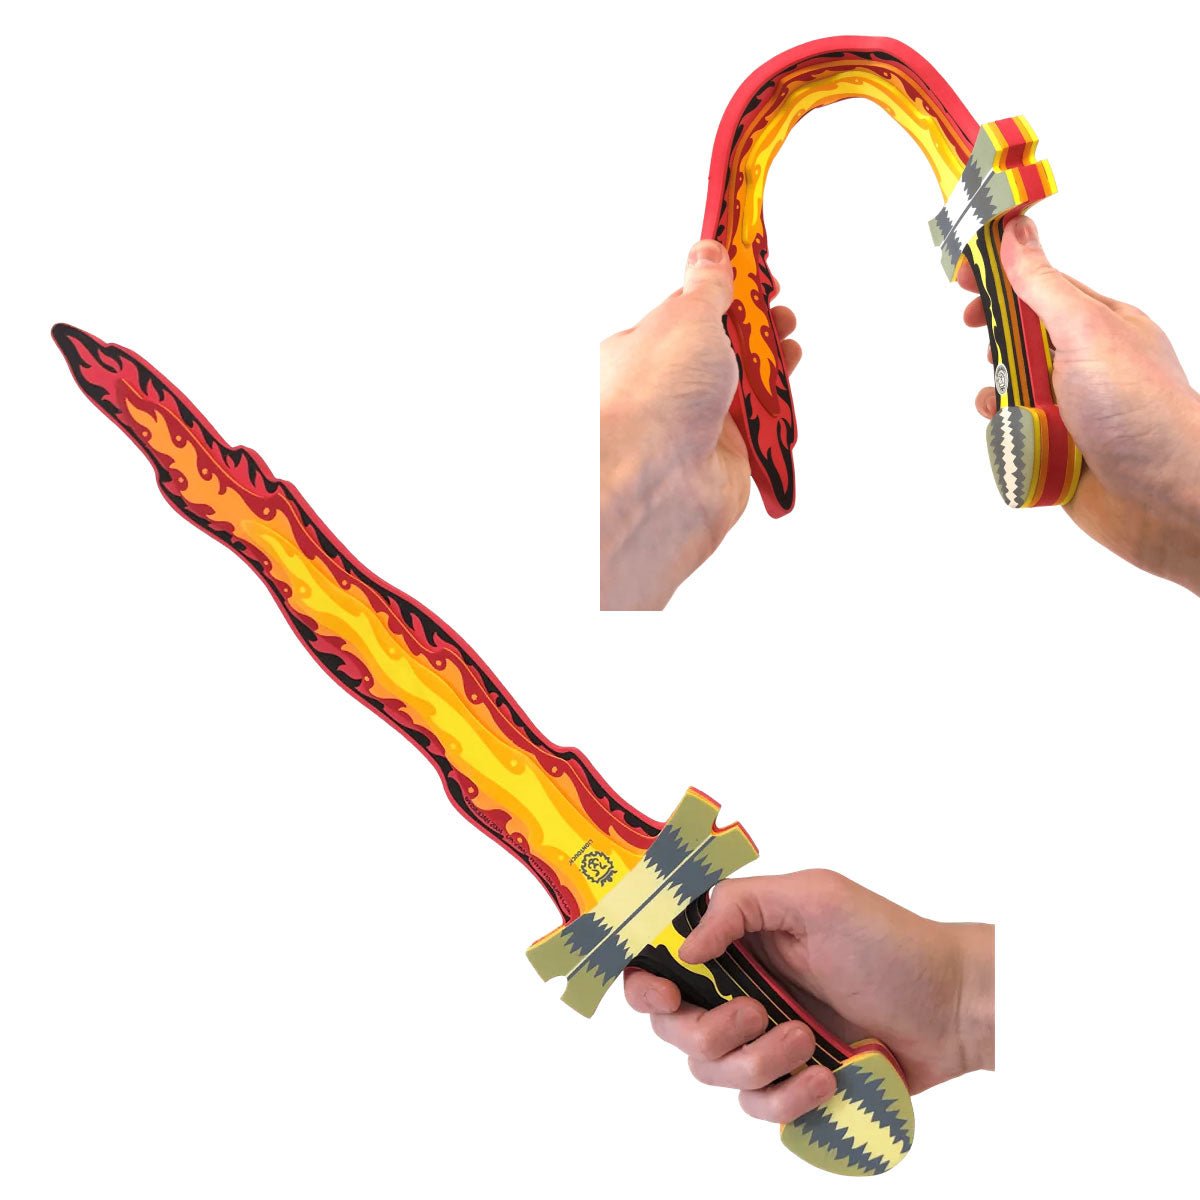  Liontouch Fantasy Flame Knight Sword